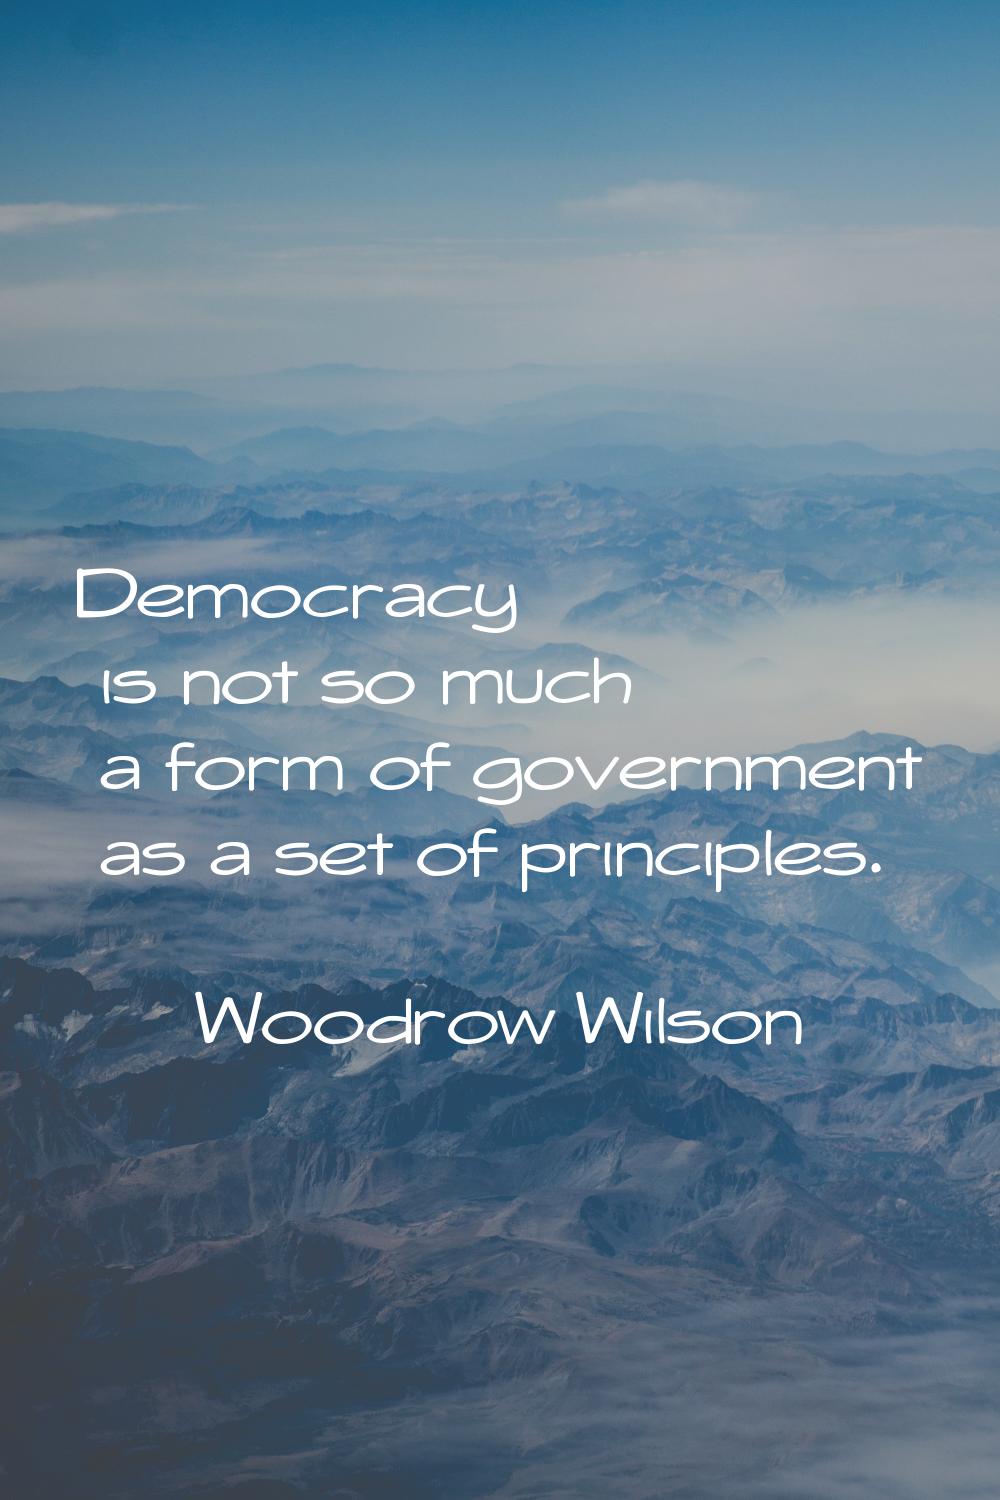 Democracy is not so much a form of government as a set of principles.